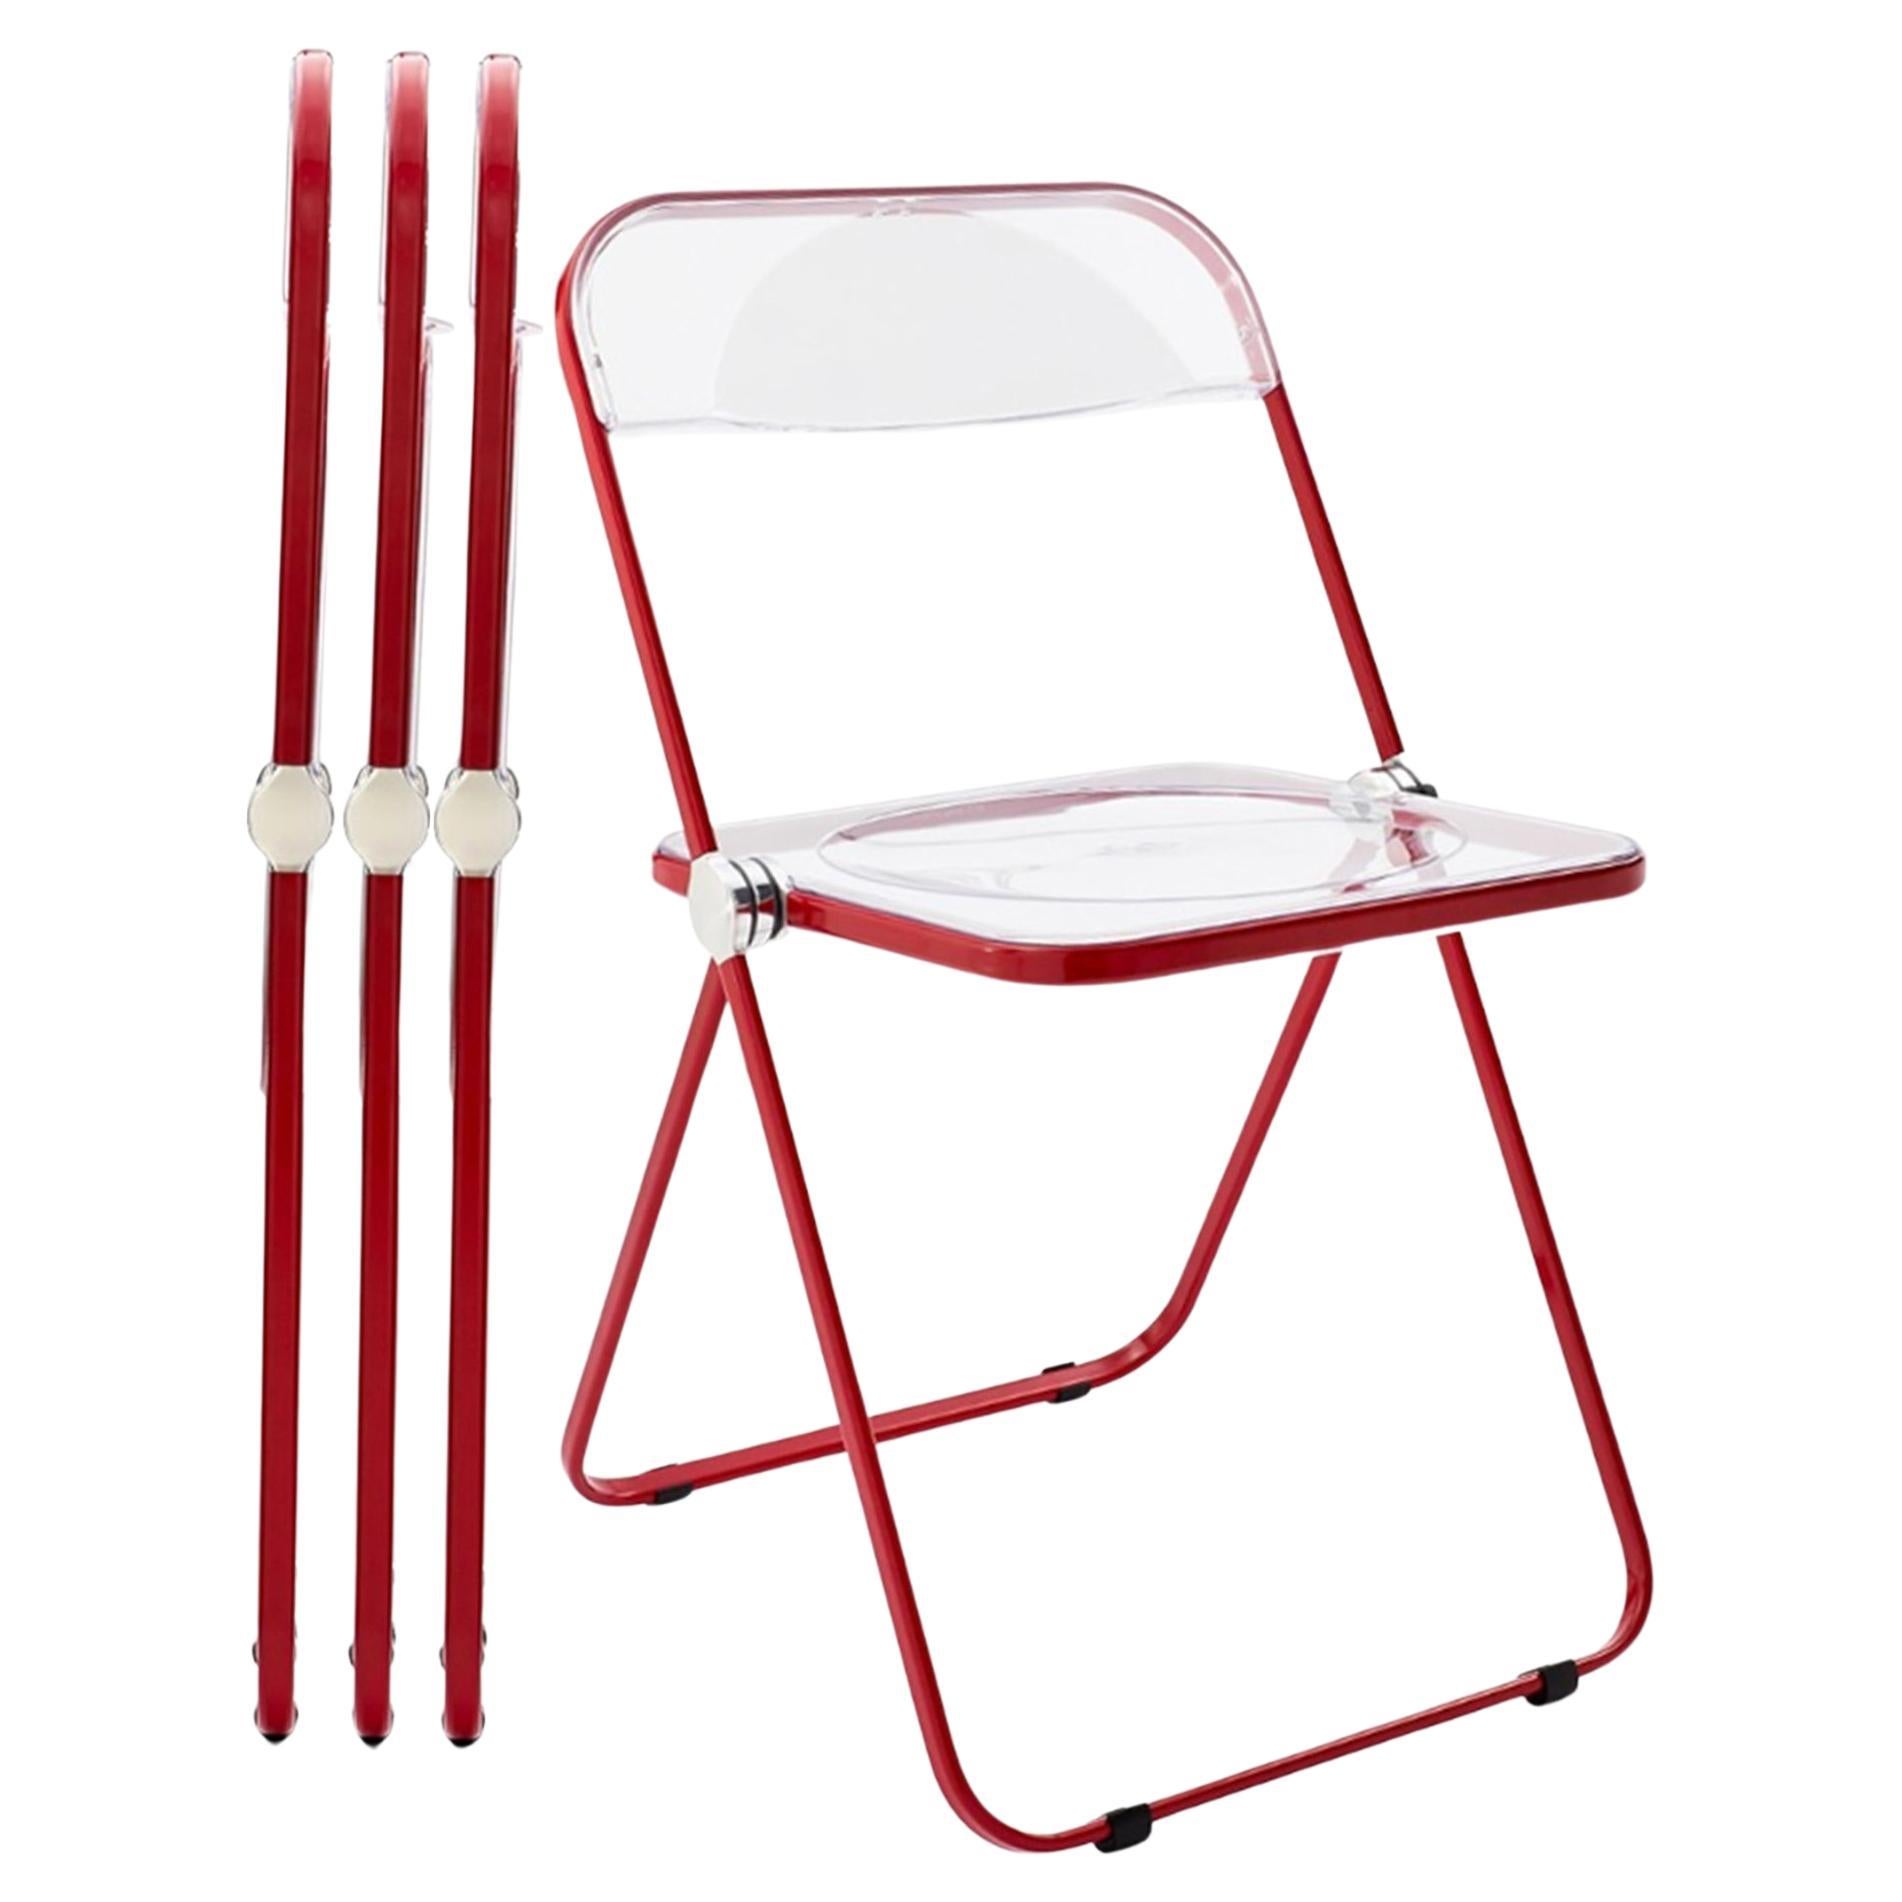 Red and Clear Lucite "Plia" folding chairs by Piretti for Castelli Italy